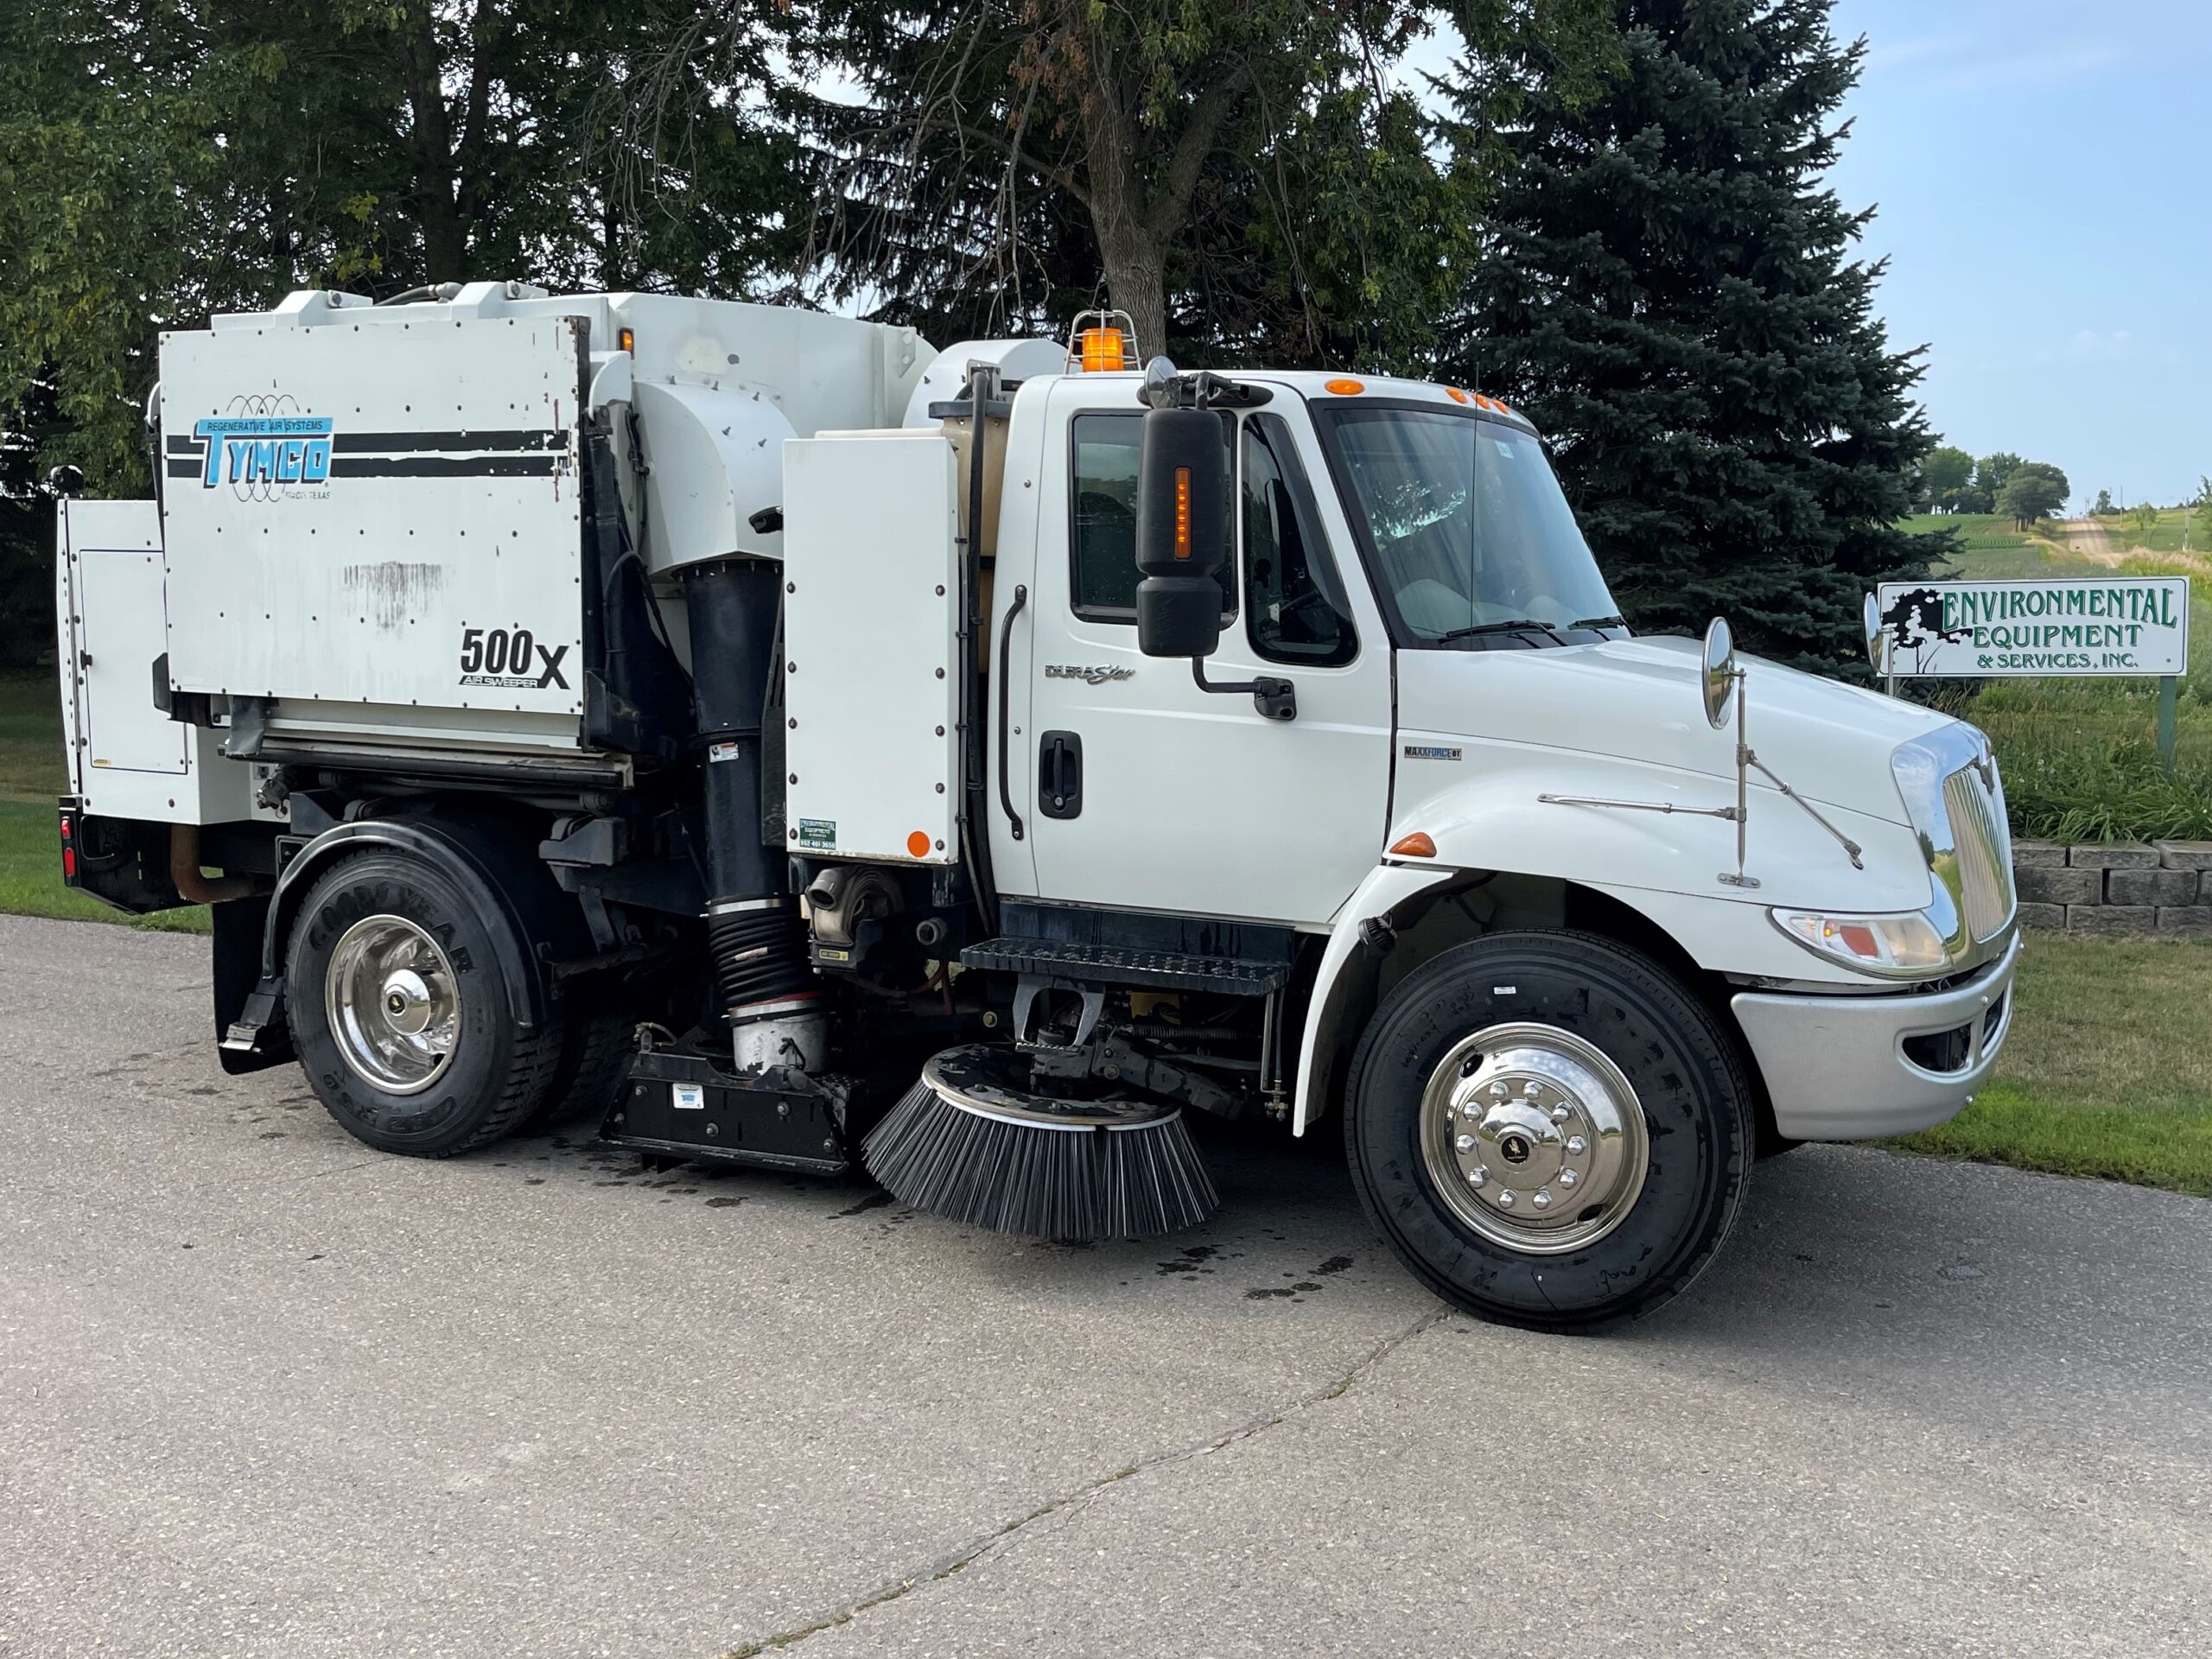 Pre-Owned Sweepers – Environmental Equipment & Services, Inc.